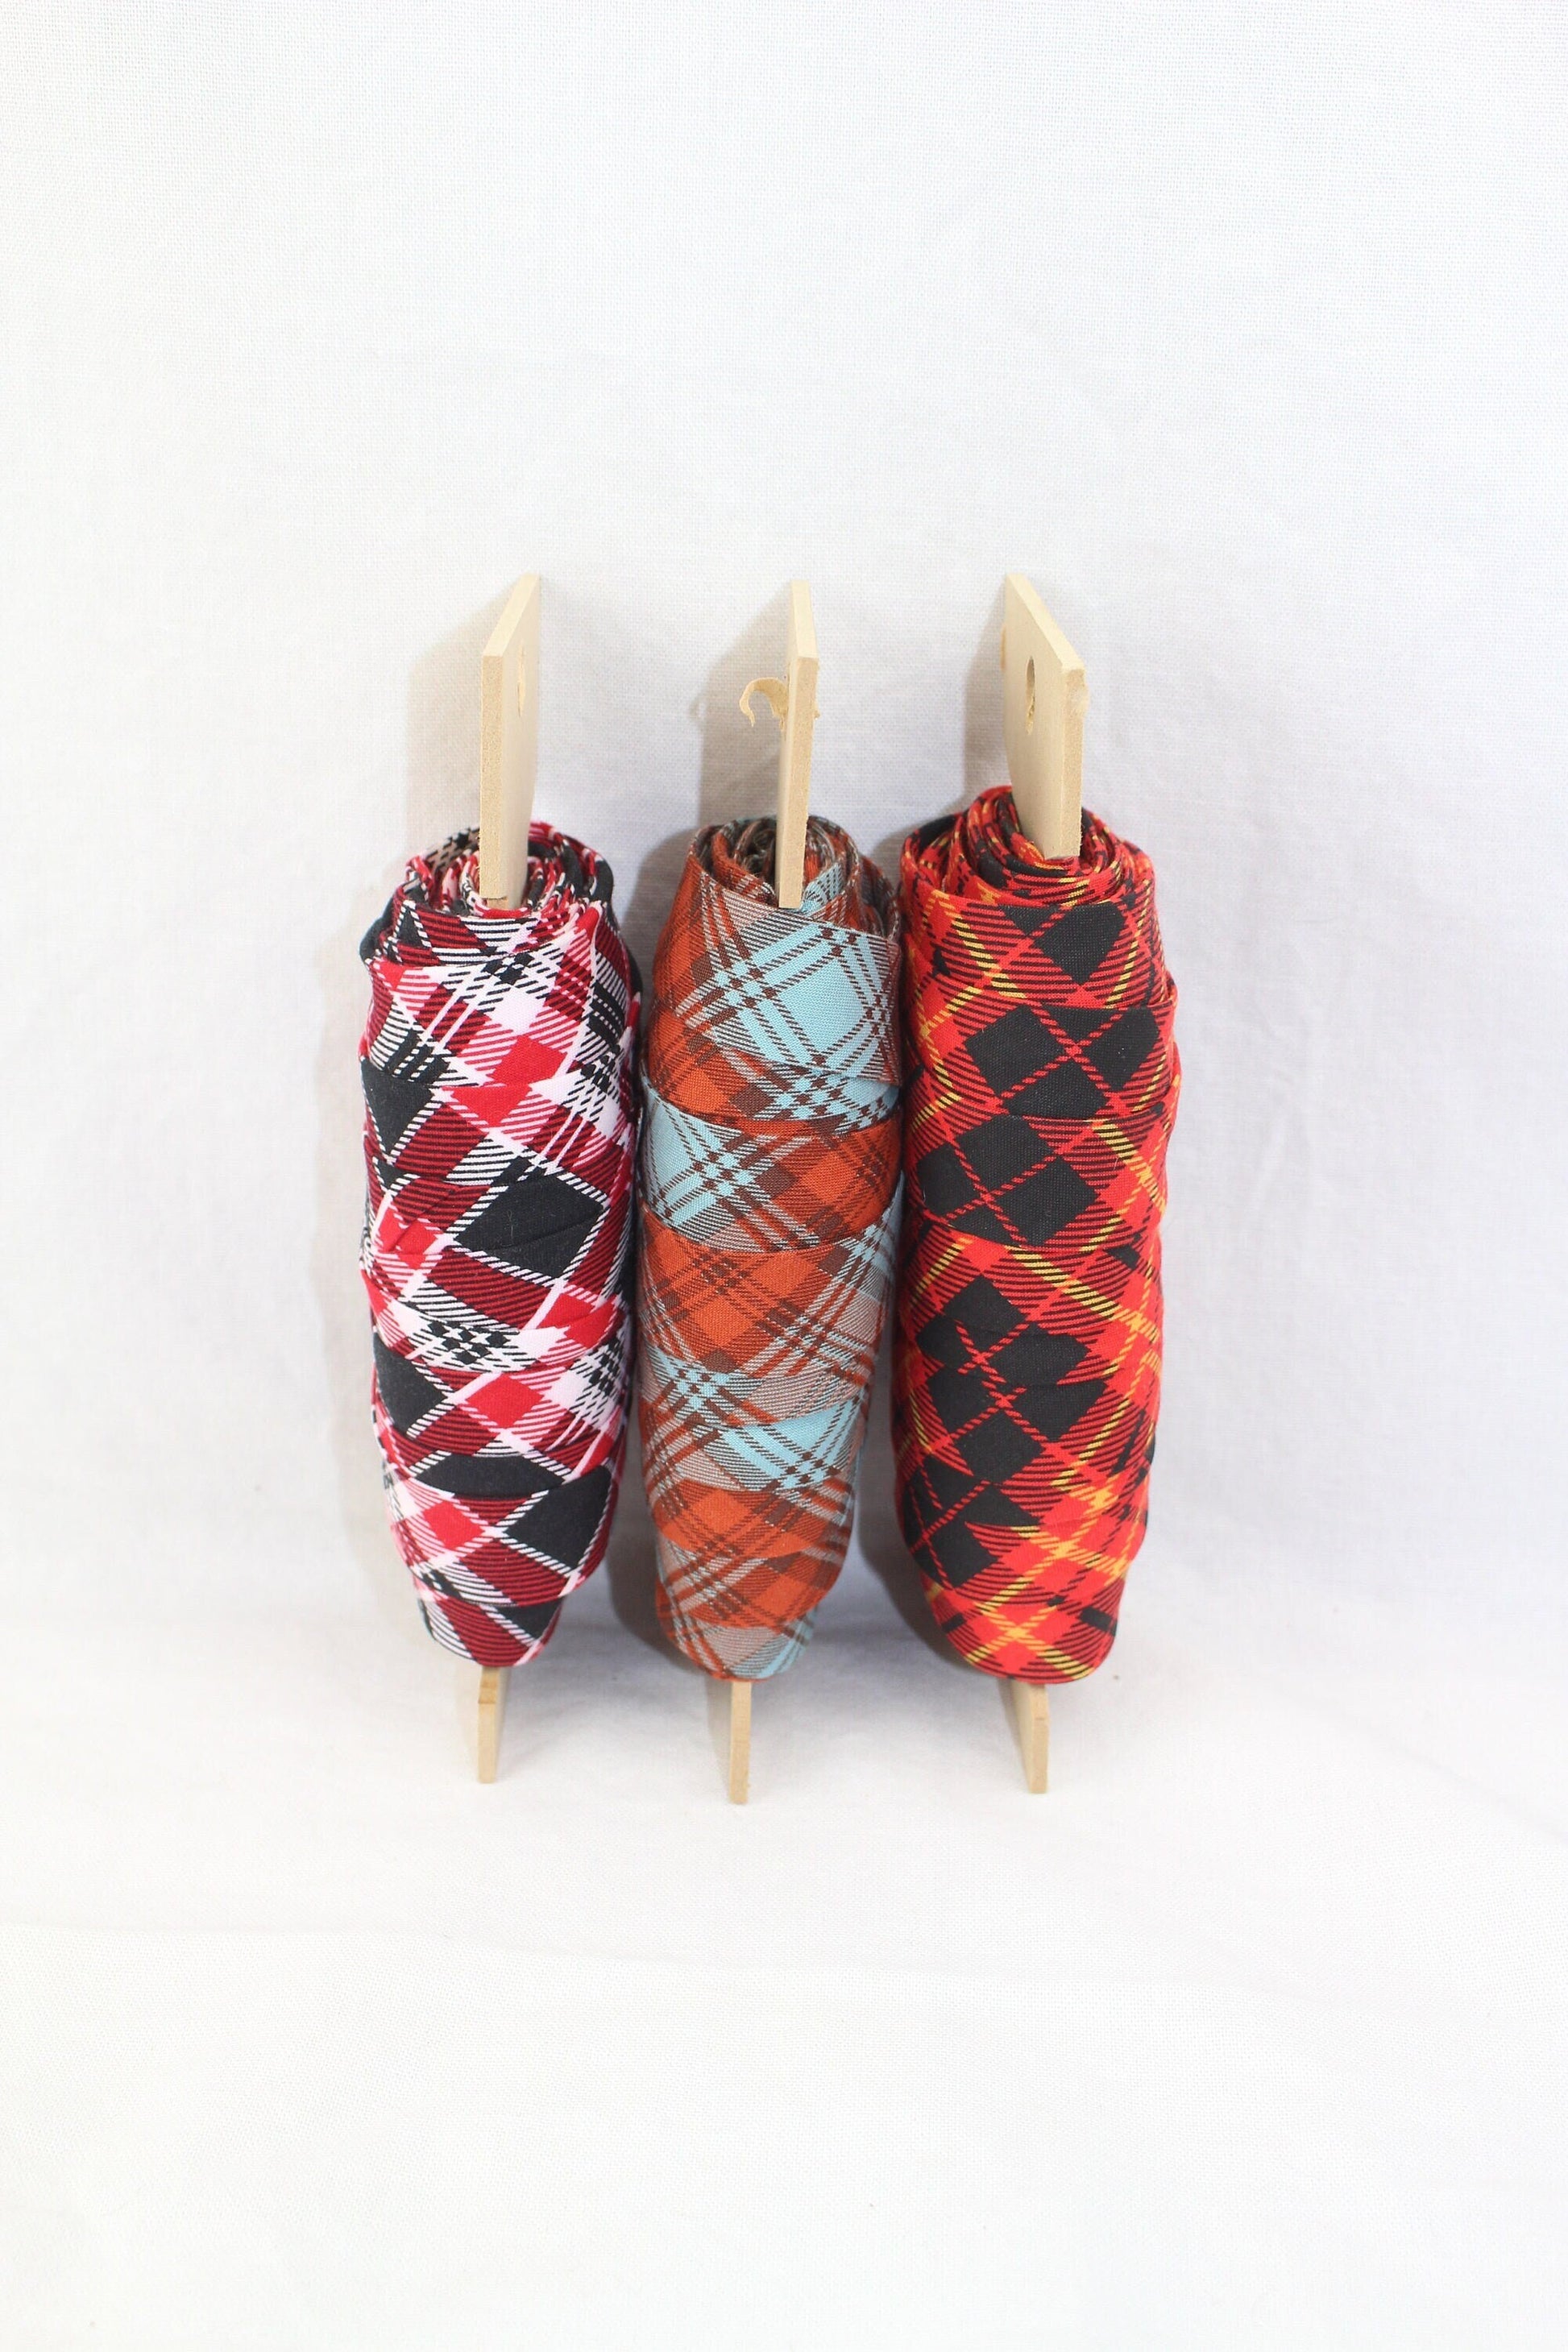 Bias Binding (Tape) 25mm, Cotton, Single Fold, red, black, blue plaid. Fusible iron on available.